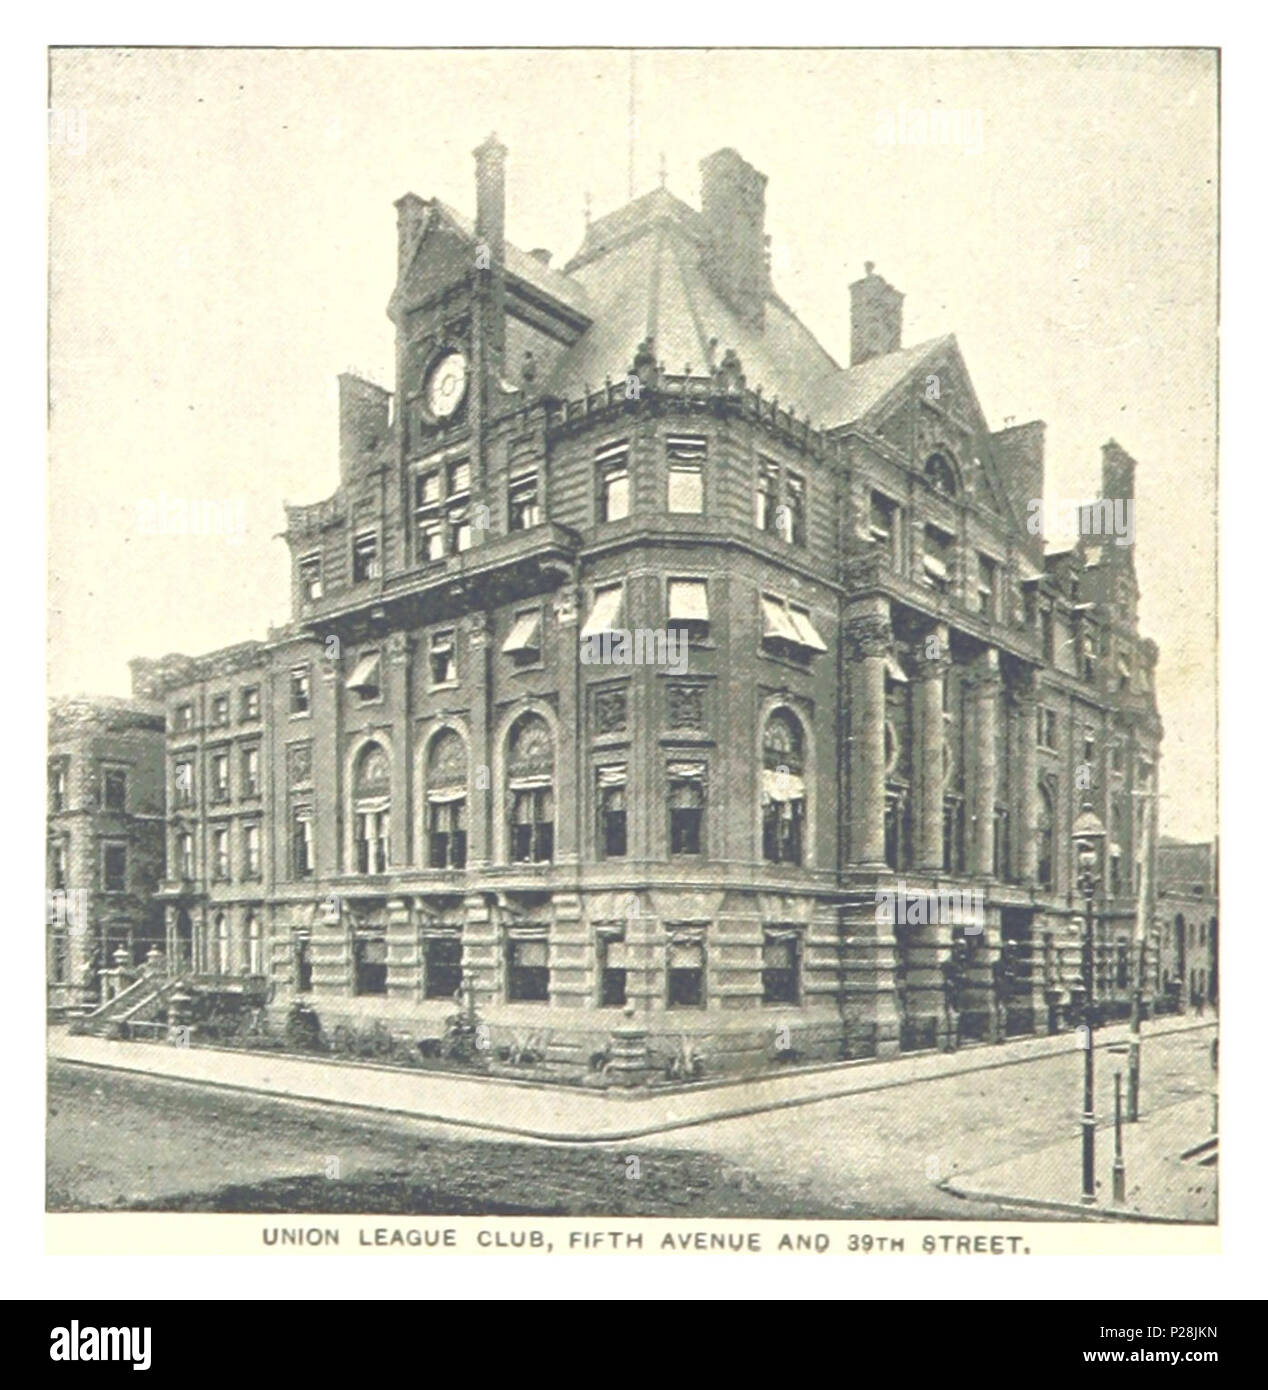 (King1893NYC) pg550 UNION LEAGUE CLUB, FIFTH AVENUE AND 39TH STREET. Stock Photo